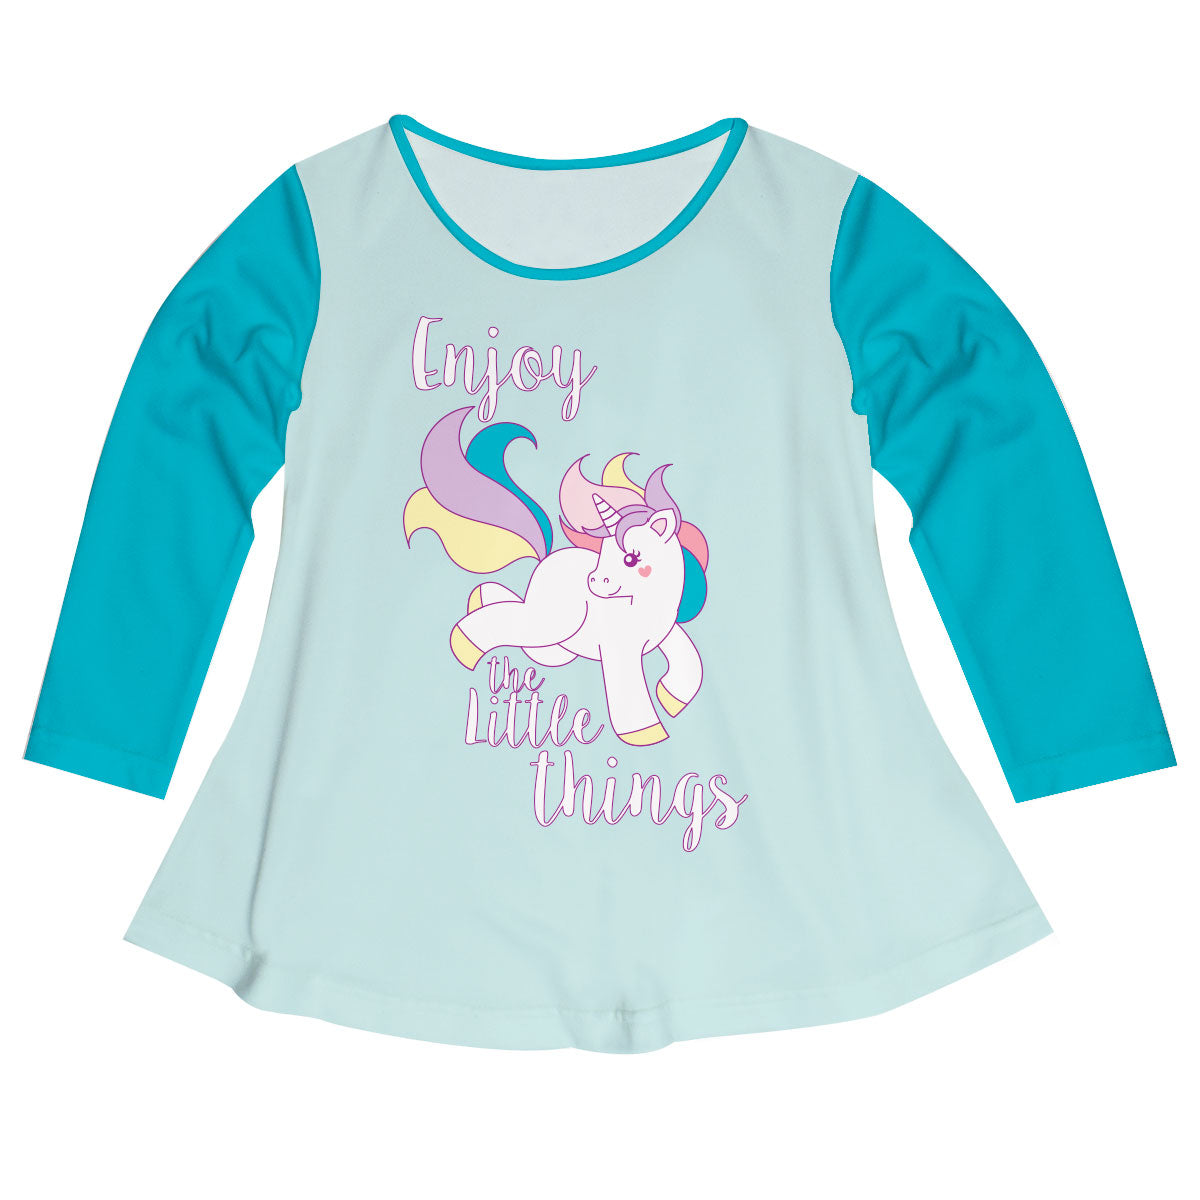 Enjoy Unicorn The Little Things Light Blue Long Sleeve Laurie Top - Wimziy&Co.